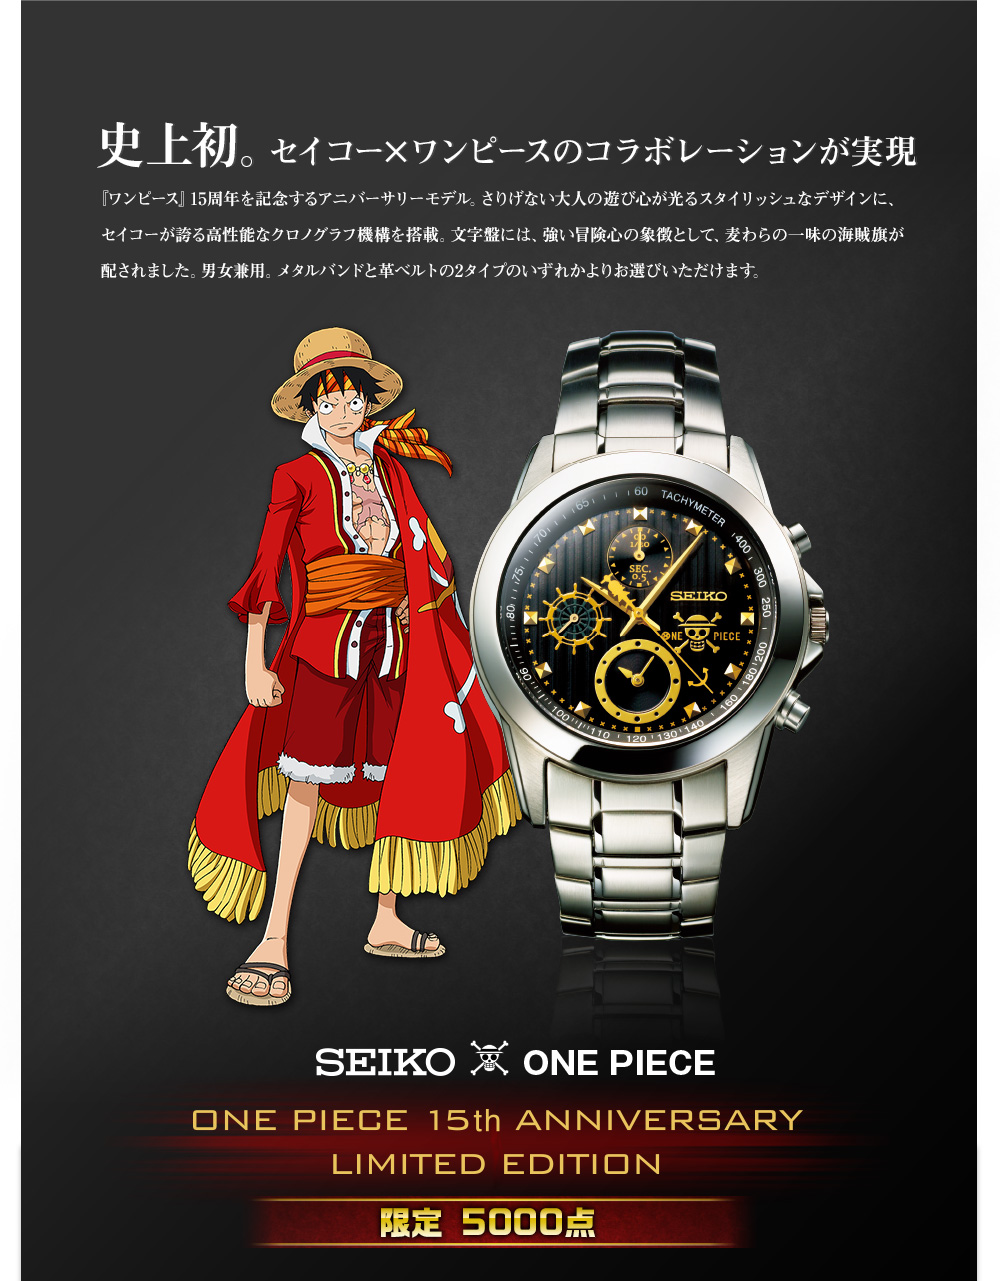 Seiko x One Piece 15th Anniversary Limited Wristwatch Announced ...